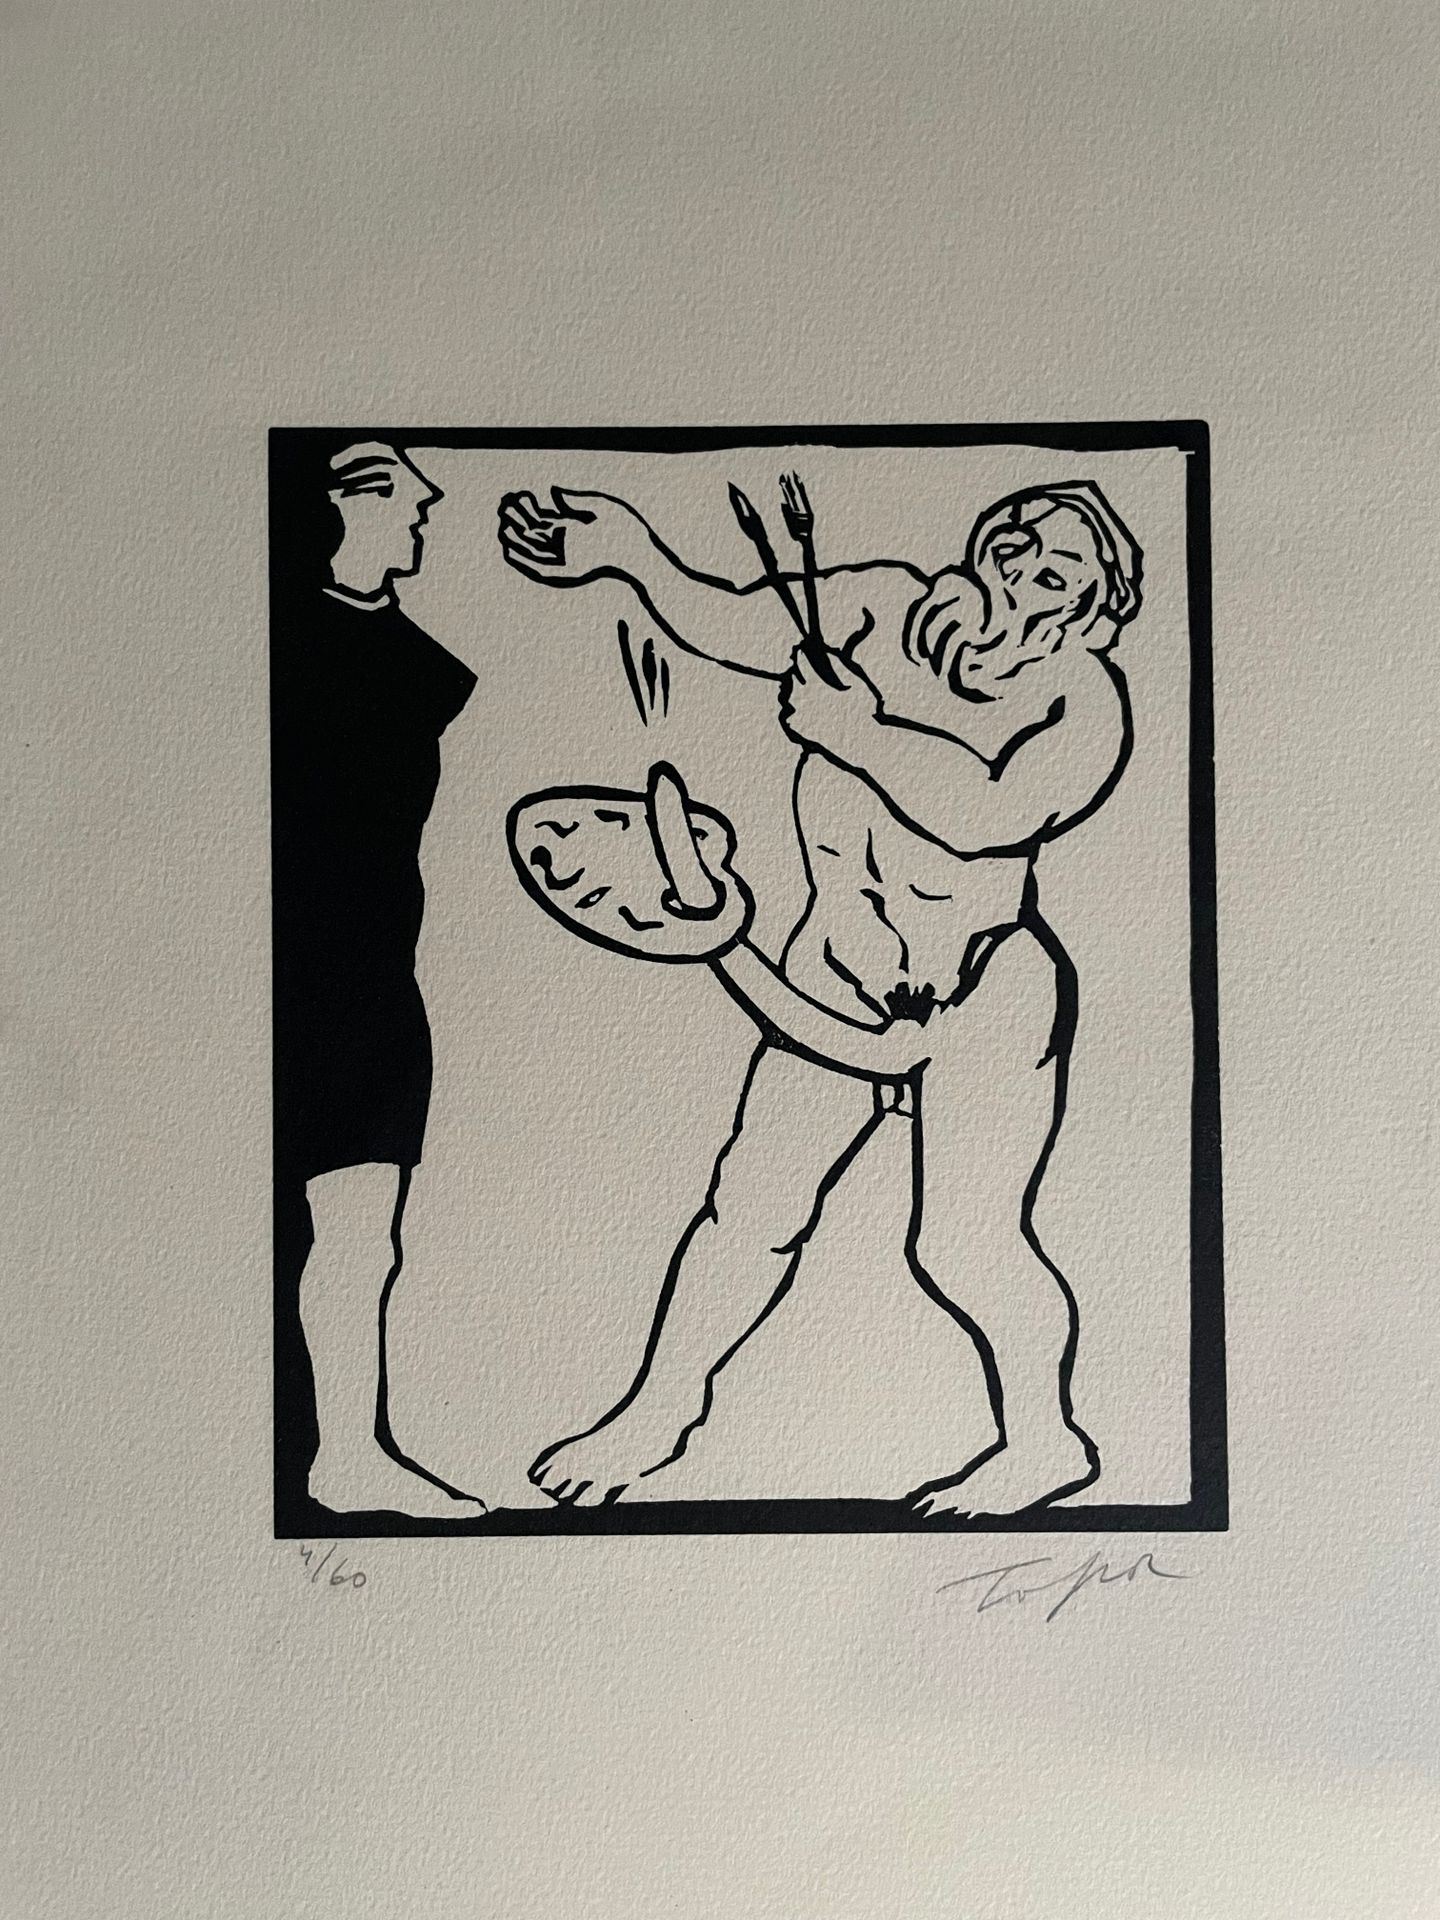 Null Roland TOPOR (1938-1997)

Priape 

Linocut 

Numbered 4/60 ex. On the botto&hellip;